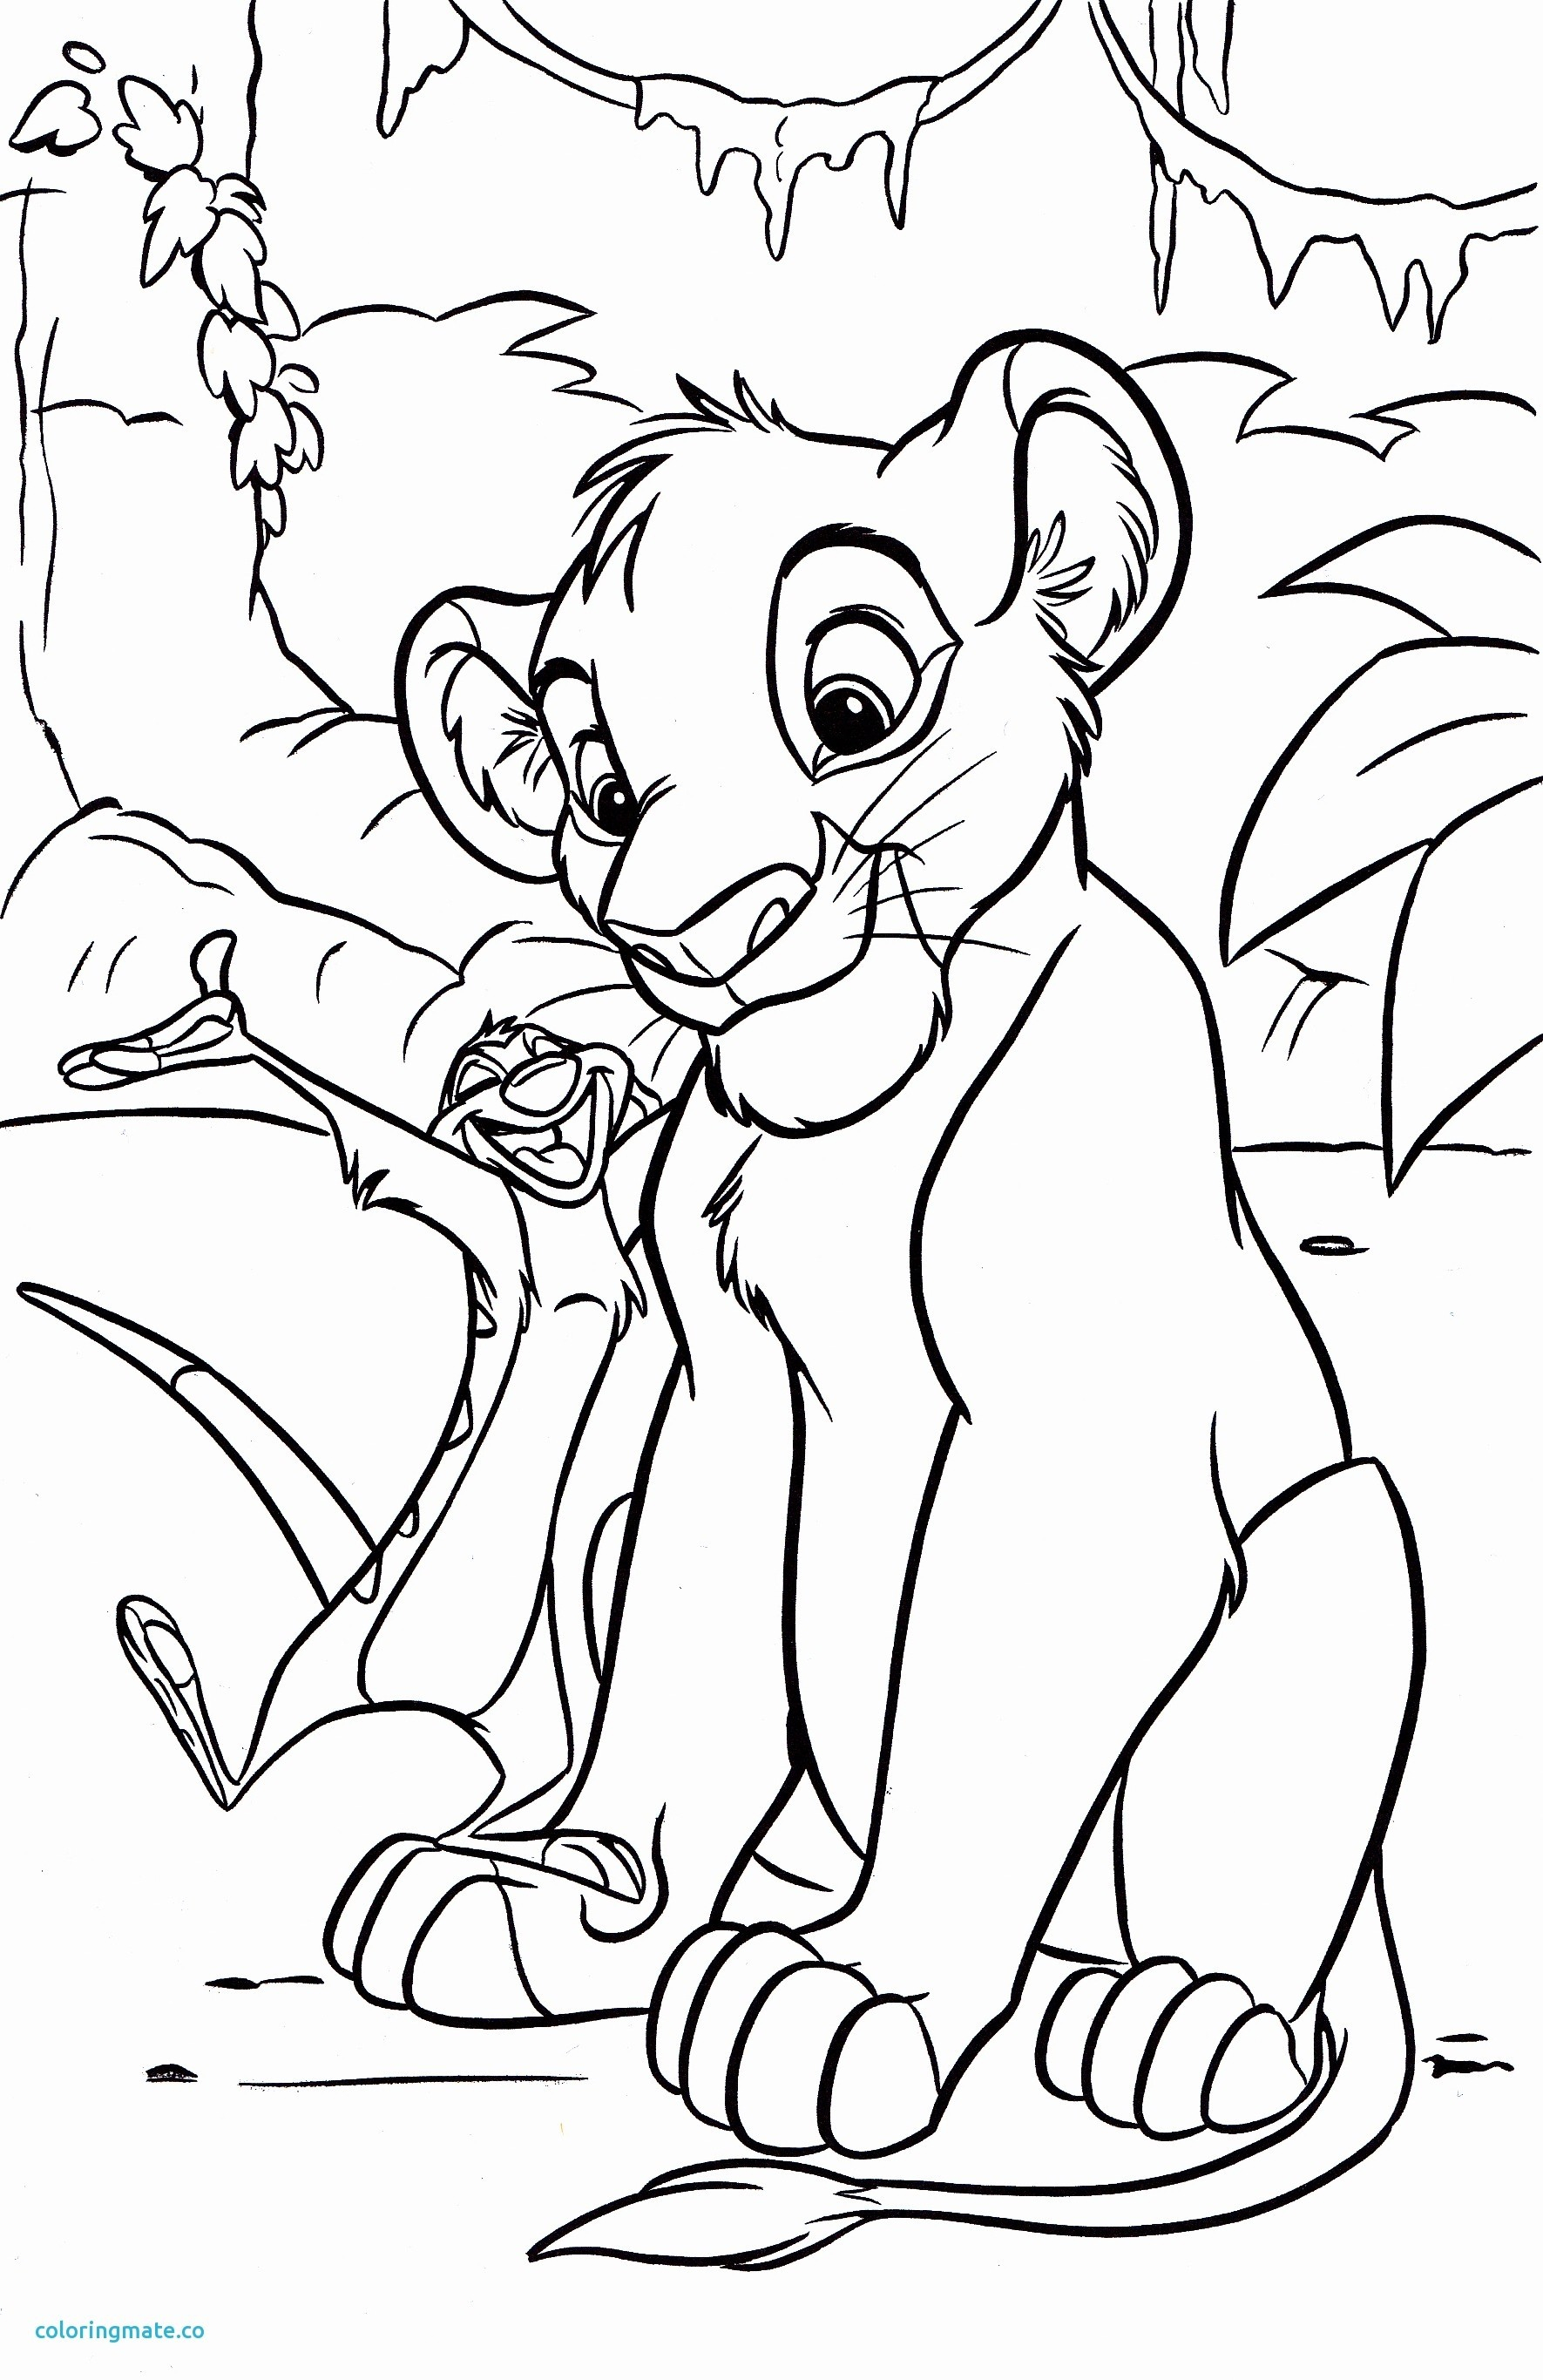 Coloring Pages : Disney Coloring Sheets Disney Coloring Sheets Free - Free Printable Disney Coloring Pages